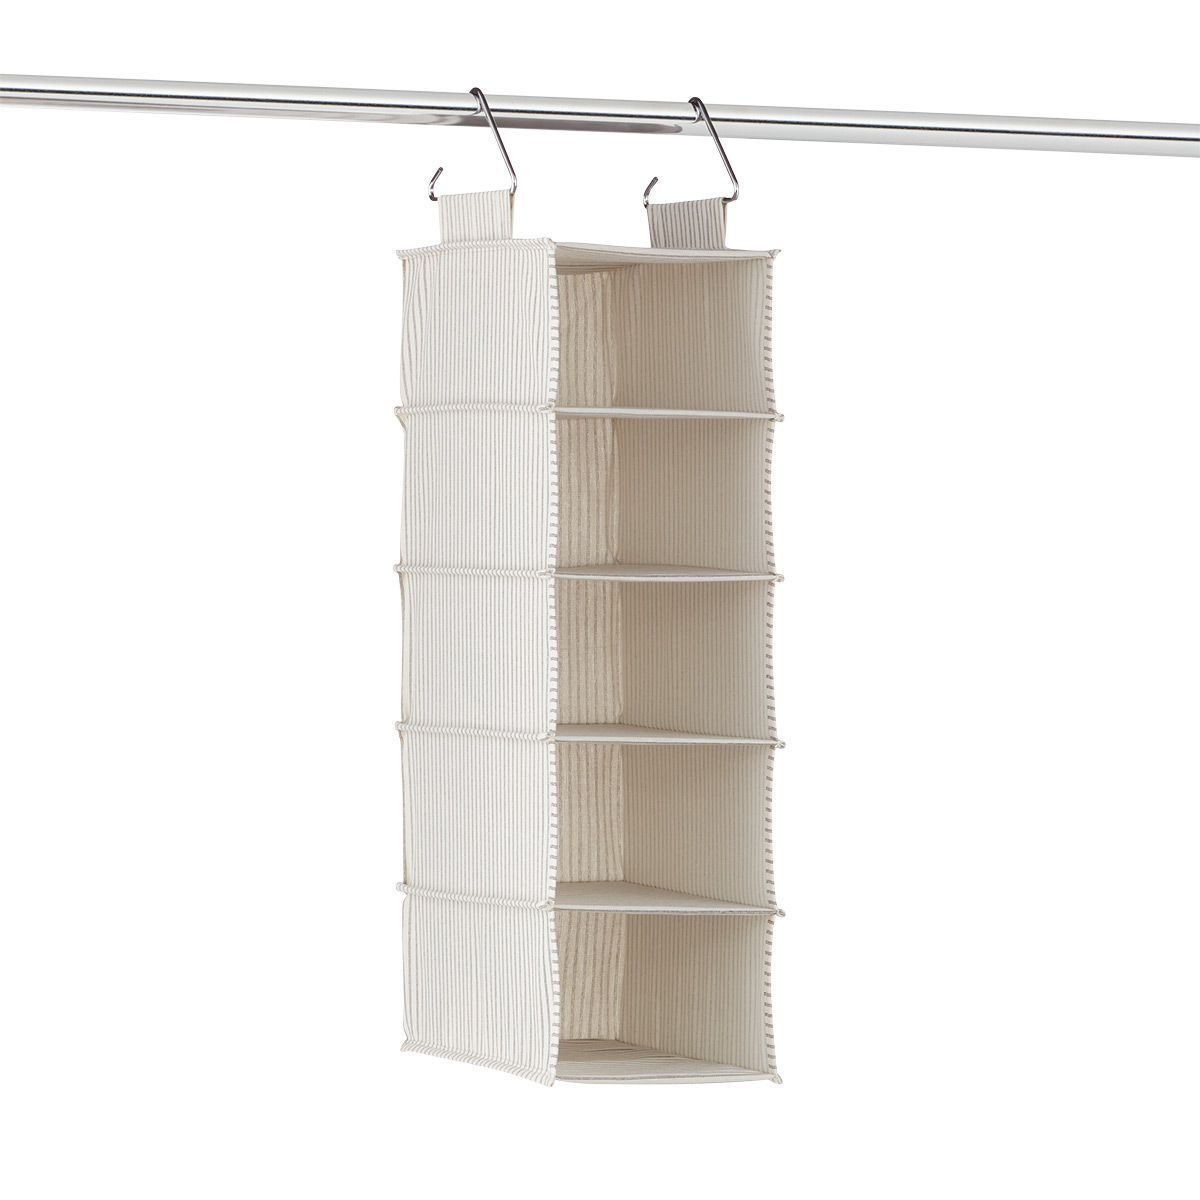 https://www.containerstore.com/catalogimages/482703/10091534-5-compartment-hanging-close.jpg